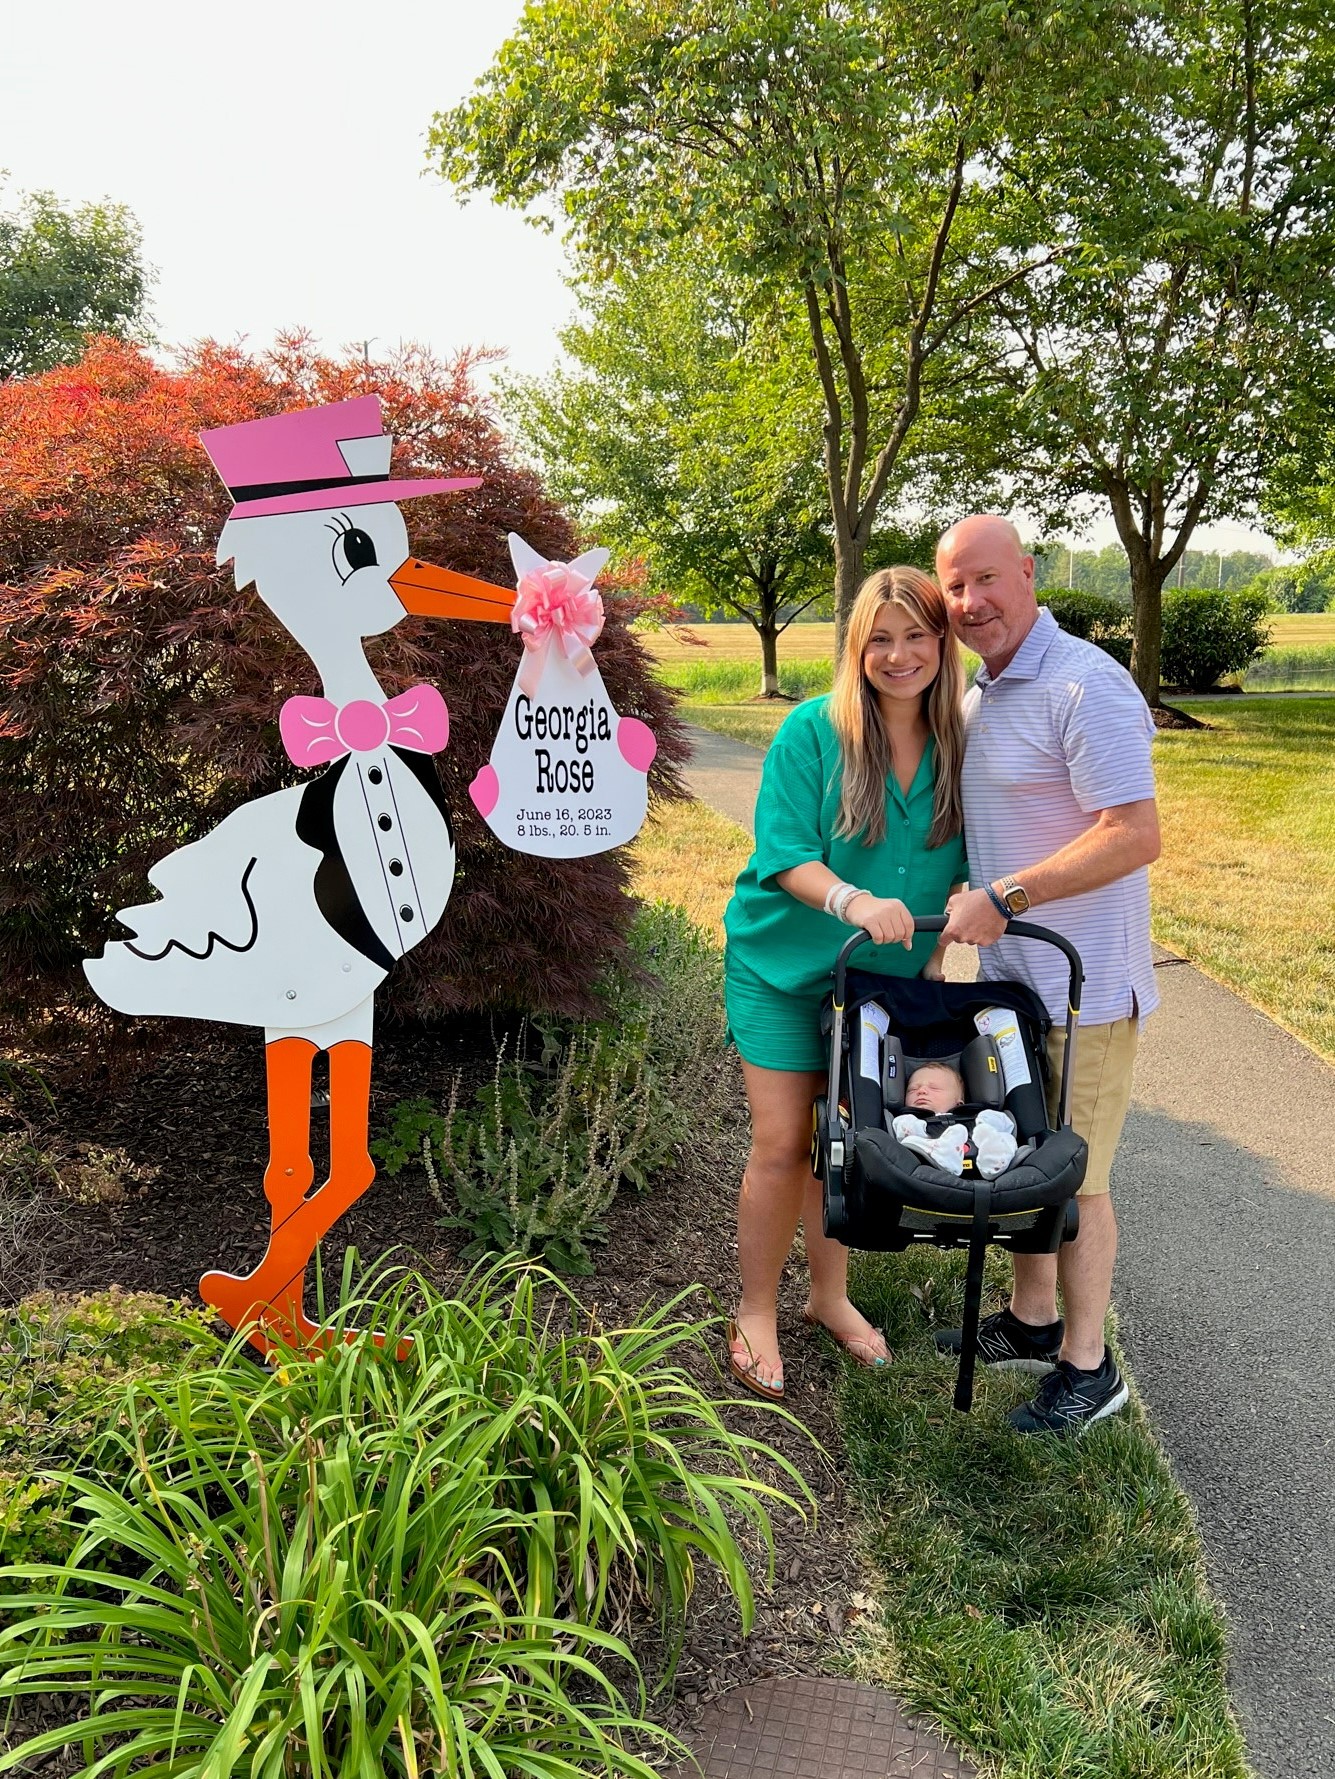 Alan, Abby and Georgia (grandad, new mom and baby), stand in front of a stork sign with Georgia Rose's name on it.